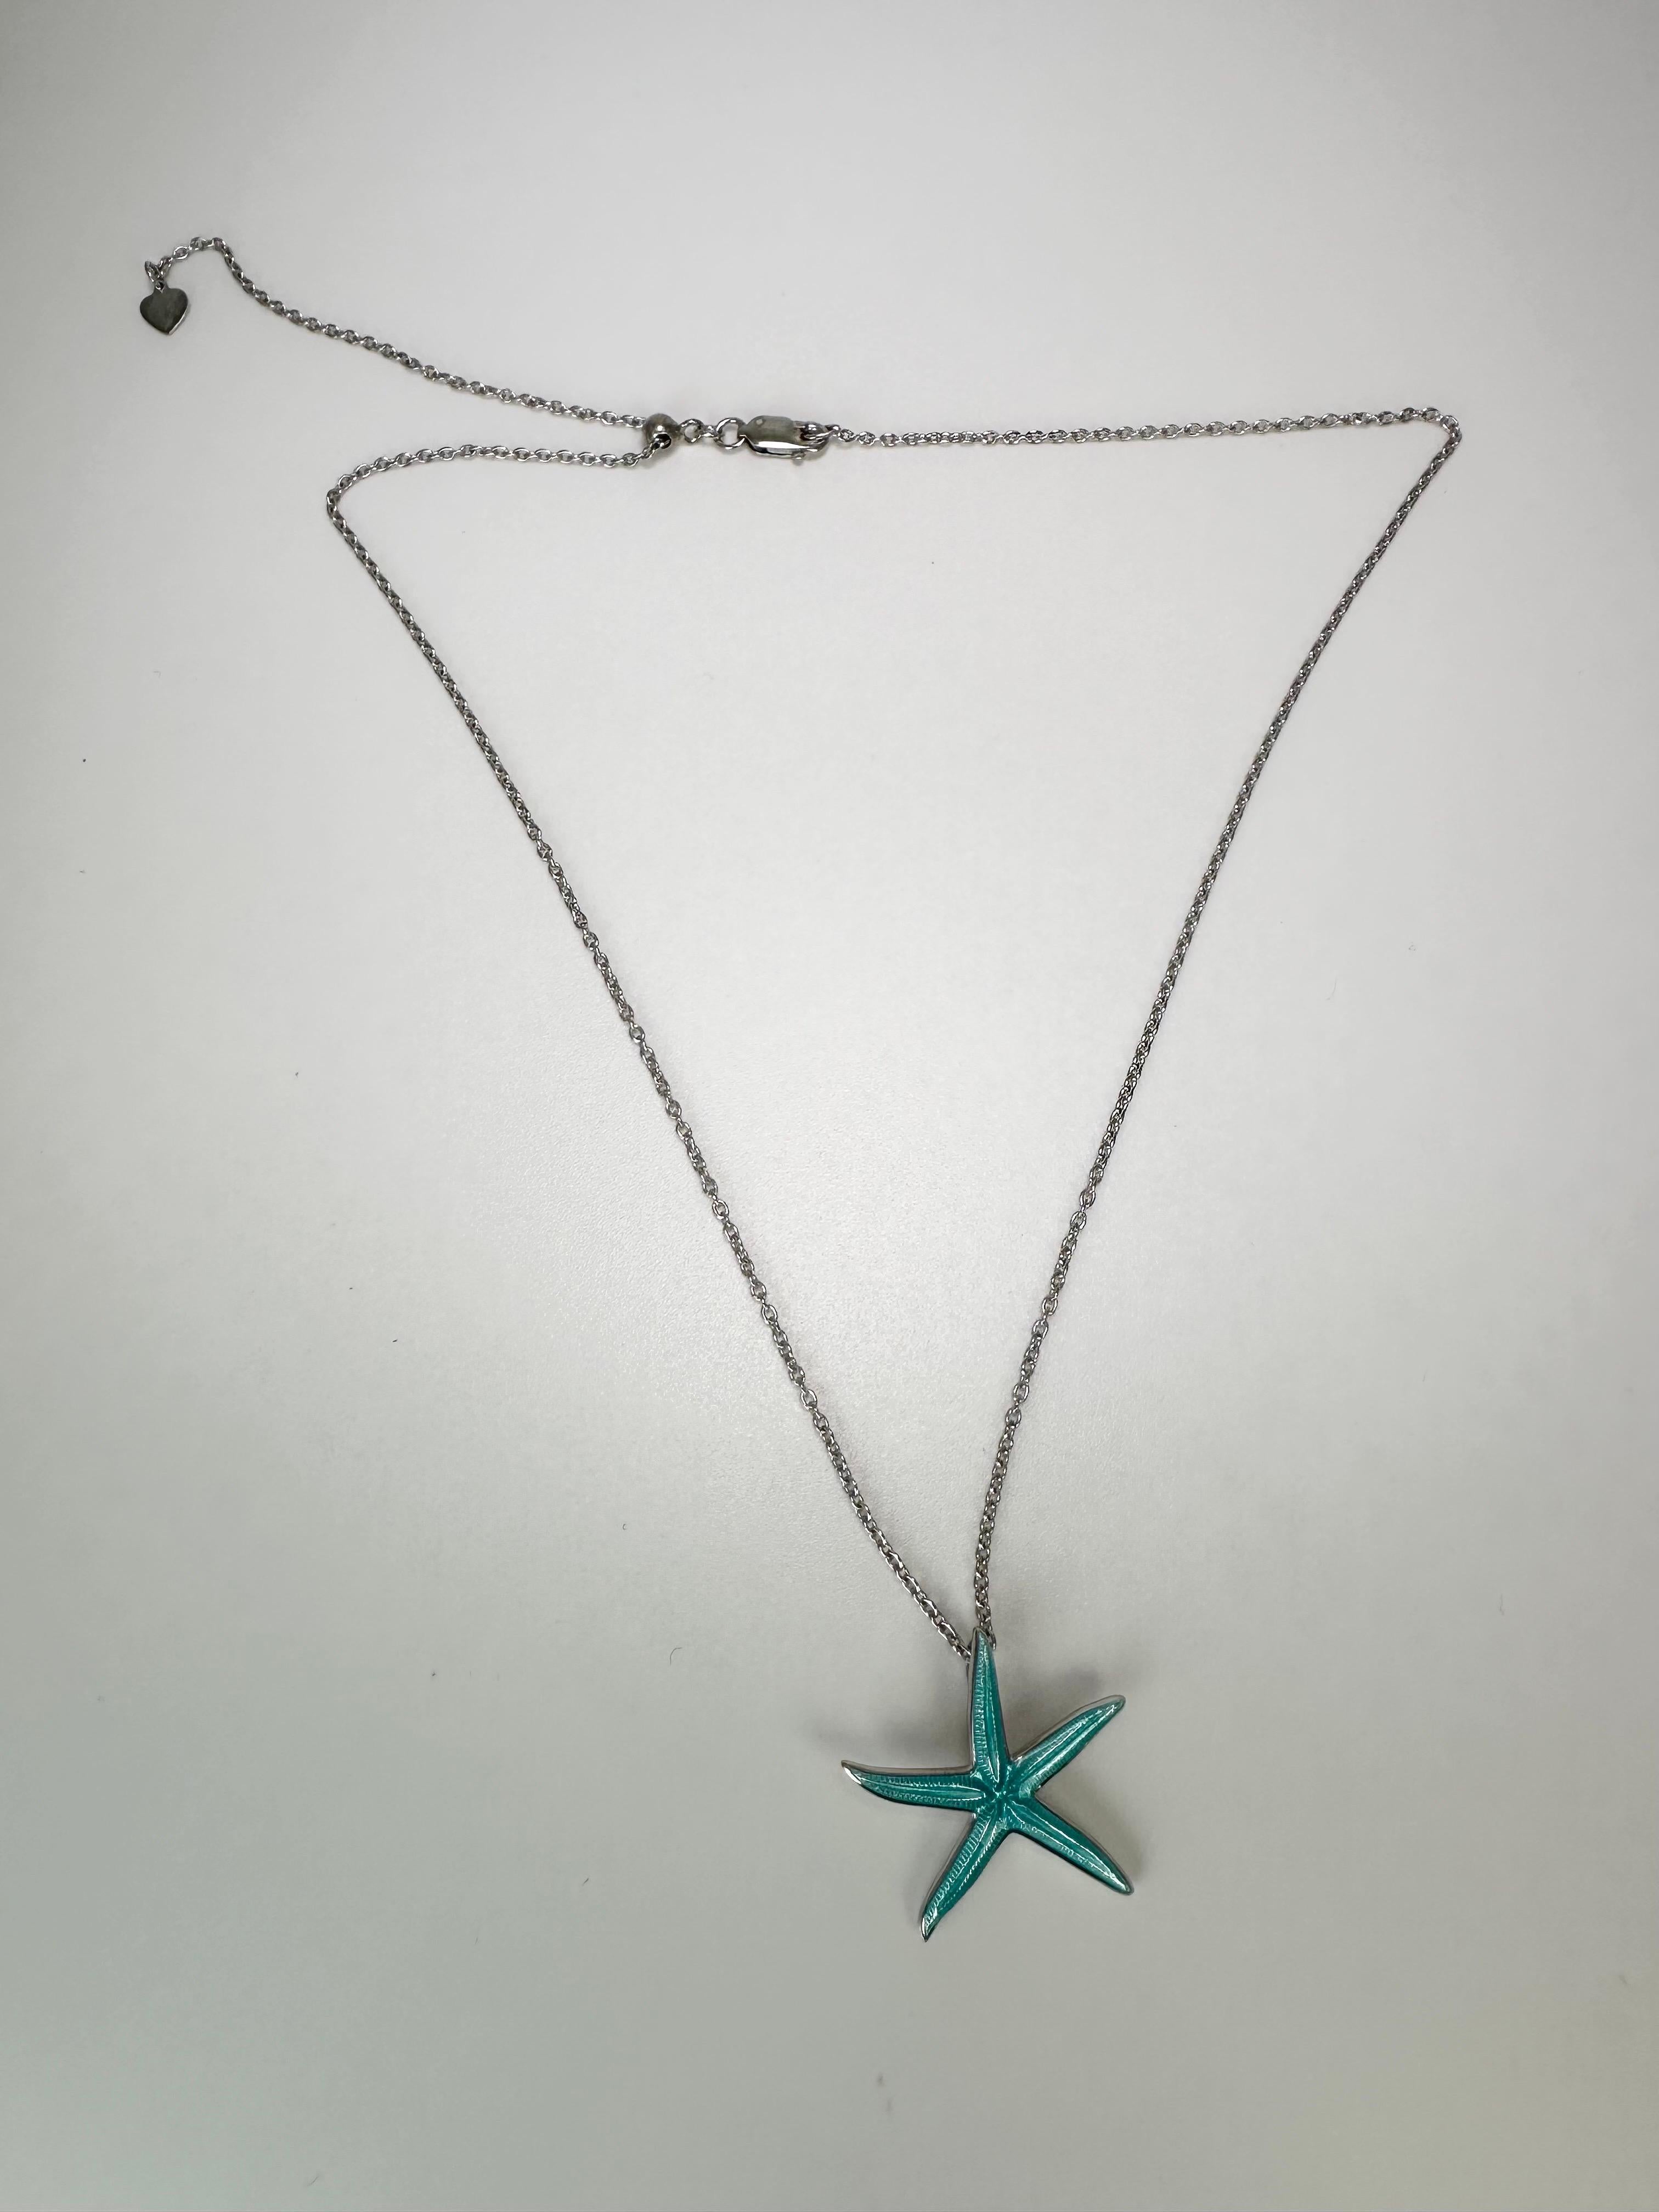 Bluish Green starfish pendant necklace enamel pendant  In New Condition For Sale In Jupiter, FL